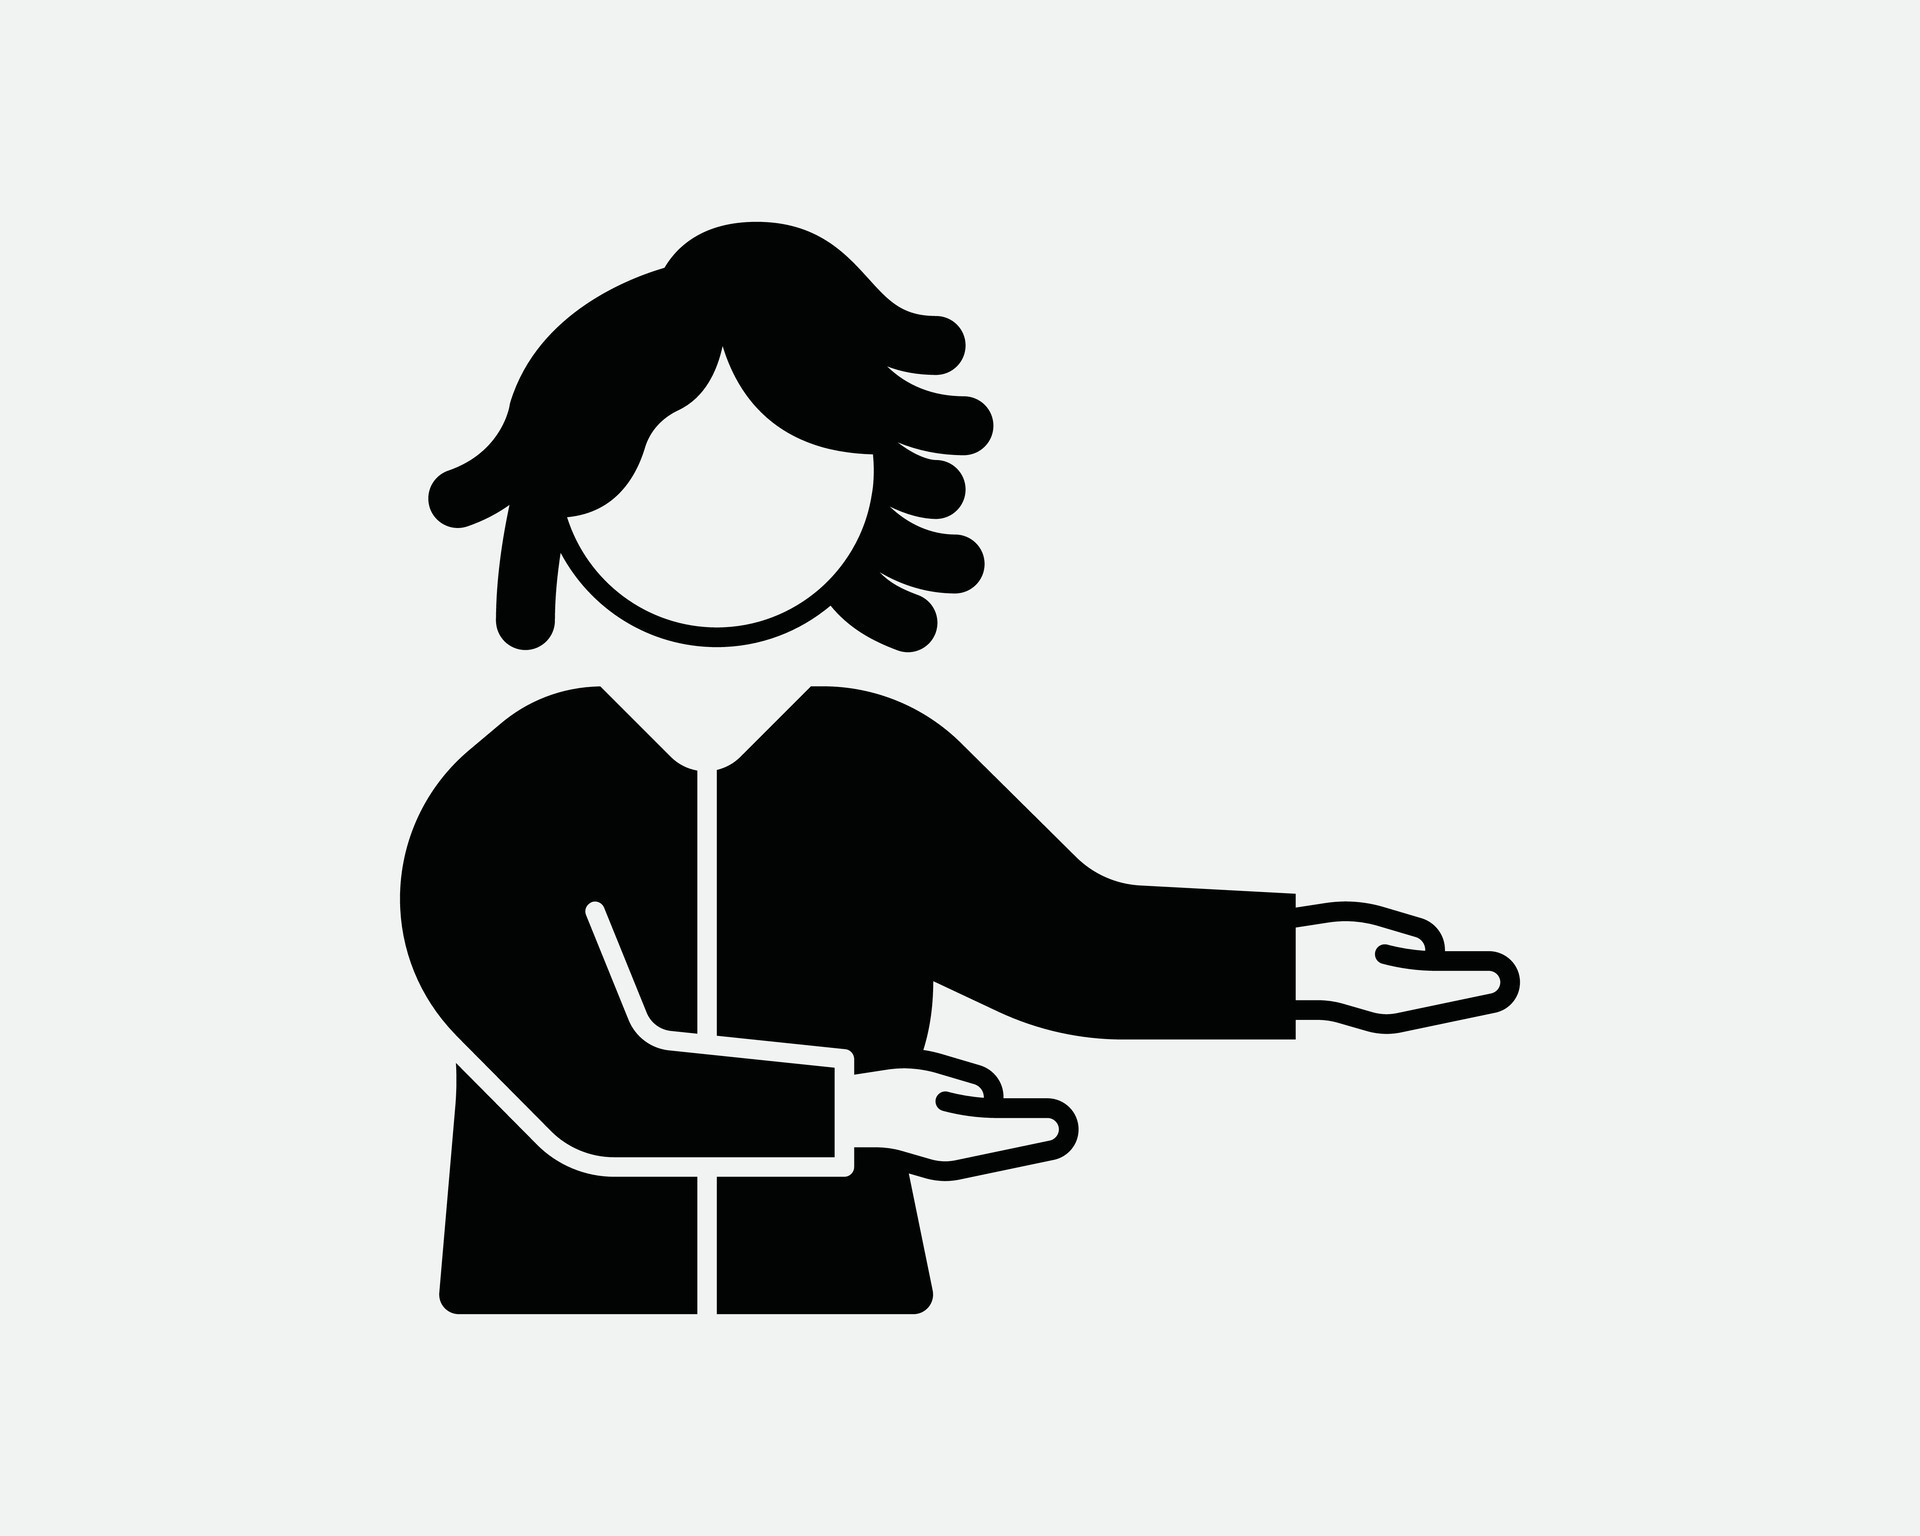 https://static.vecteezy.com/system/resources/previews/032/047/782/original/woman-showing-gesture-icon-girl-female-invite-welcome-show-usher-stick-figure-hand-point-pointing-black-white-line-outline-shape-sign-symbol-eps-vector.jpg